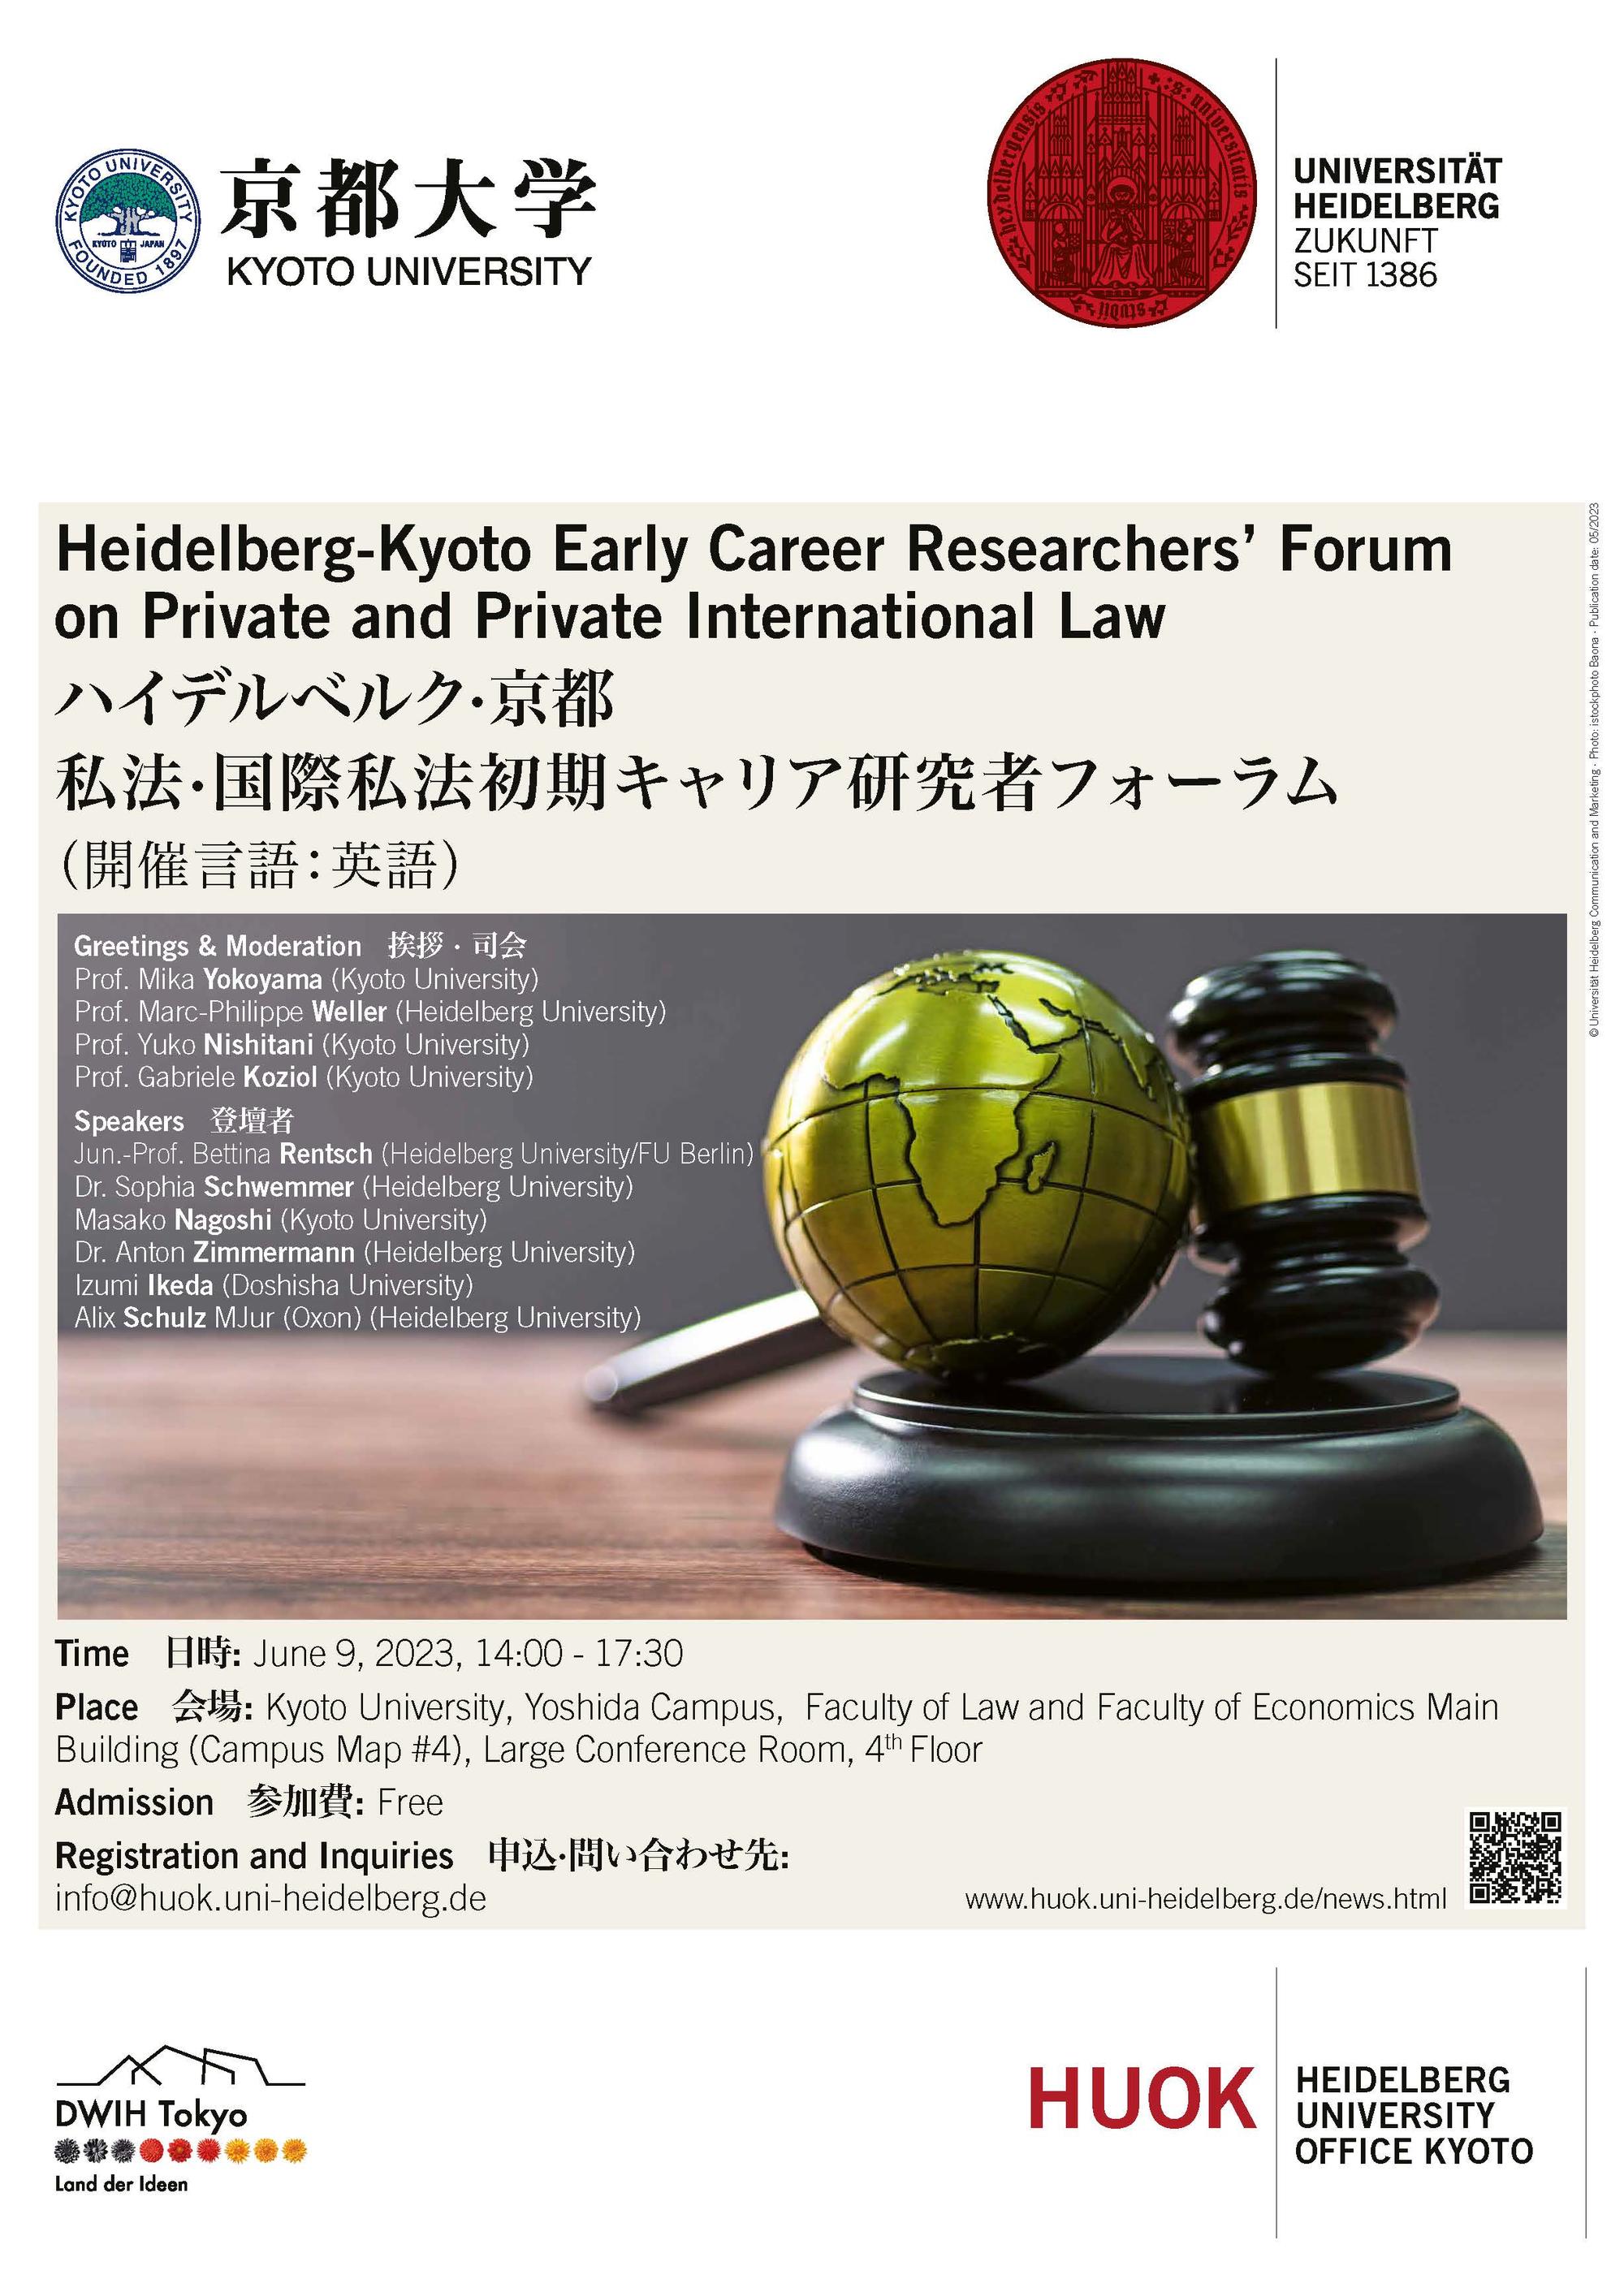 Heidelberg-Kyoto Early Career Researchers’ Forum on Private and Private International Law (Kyoto University)